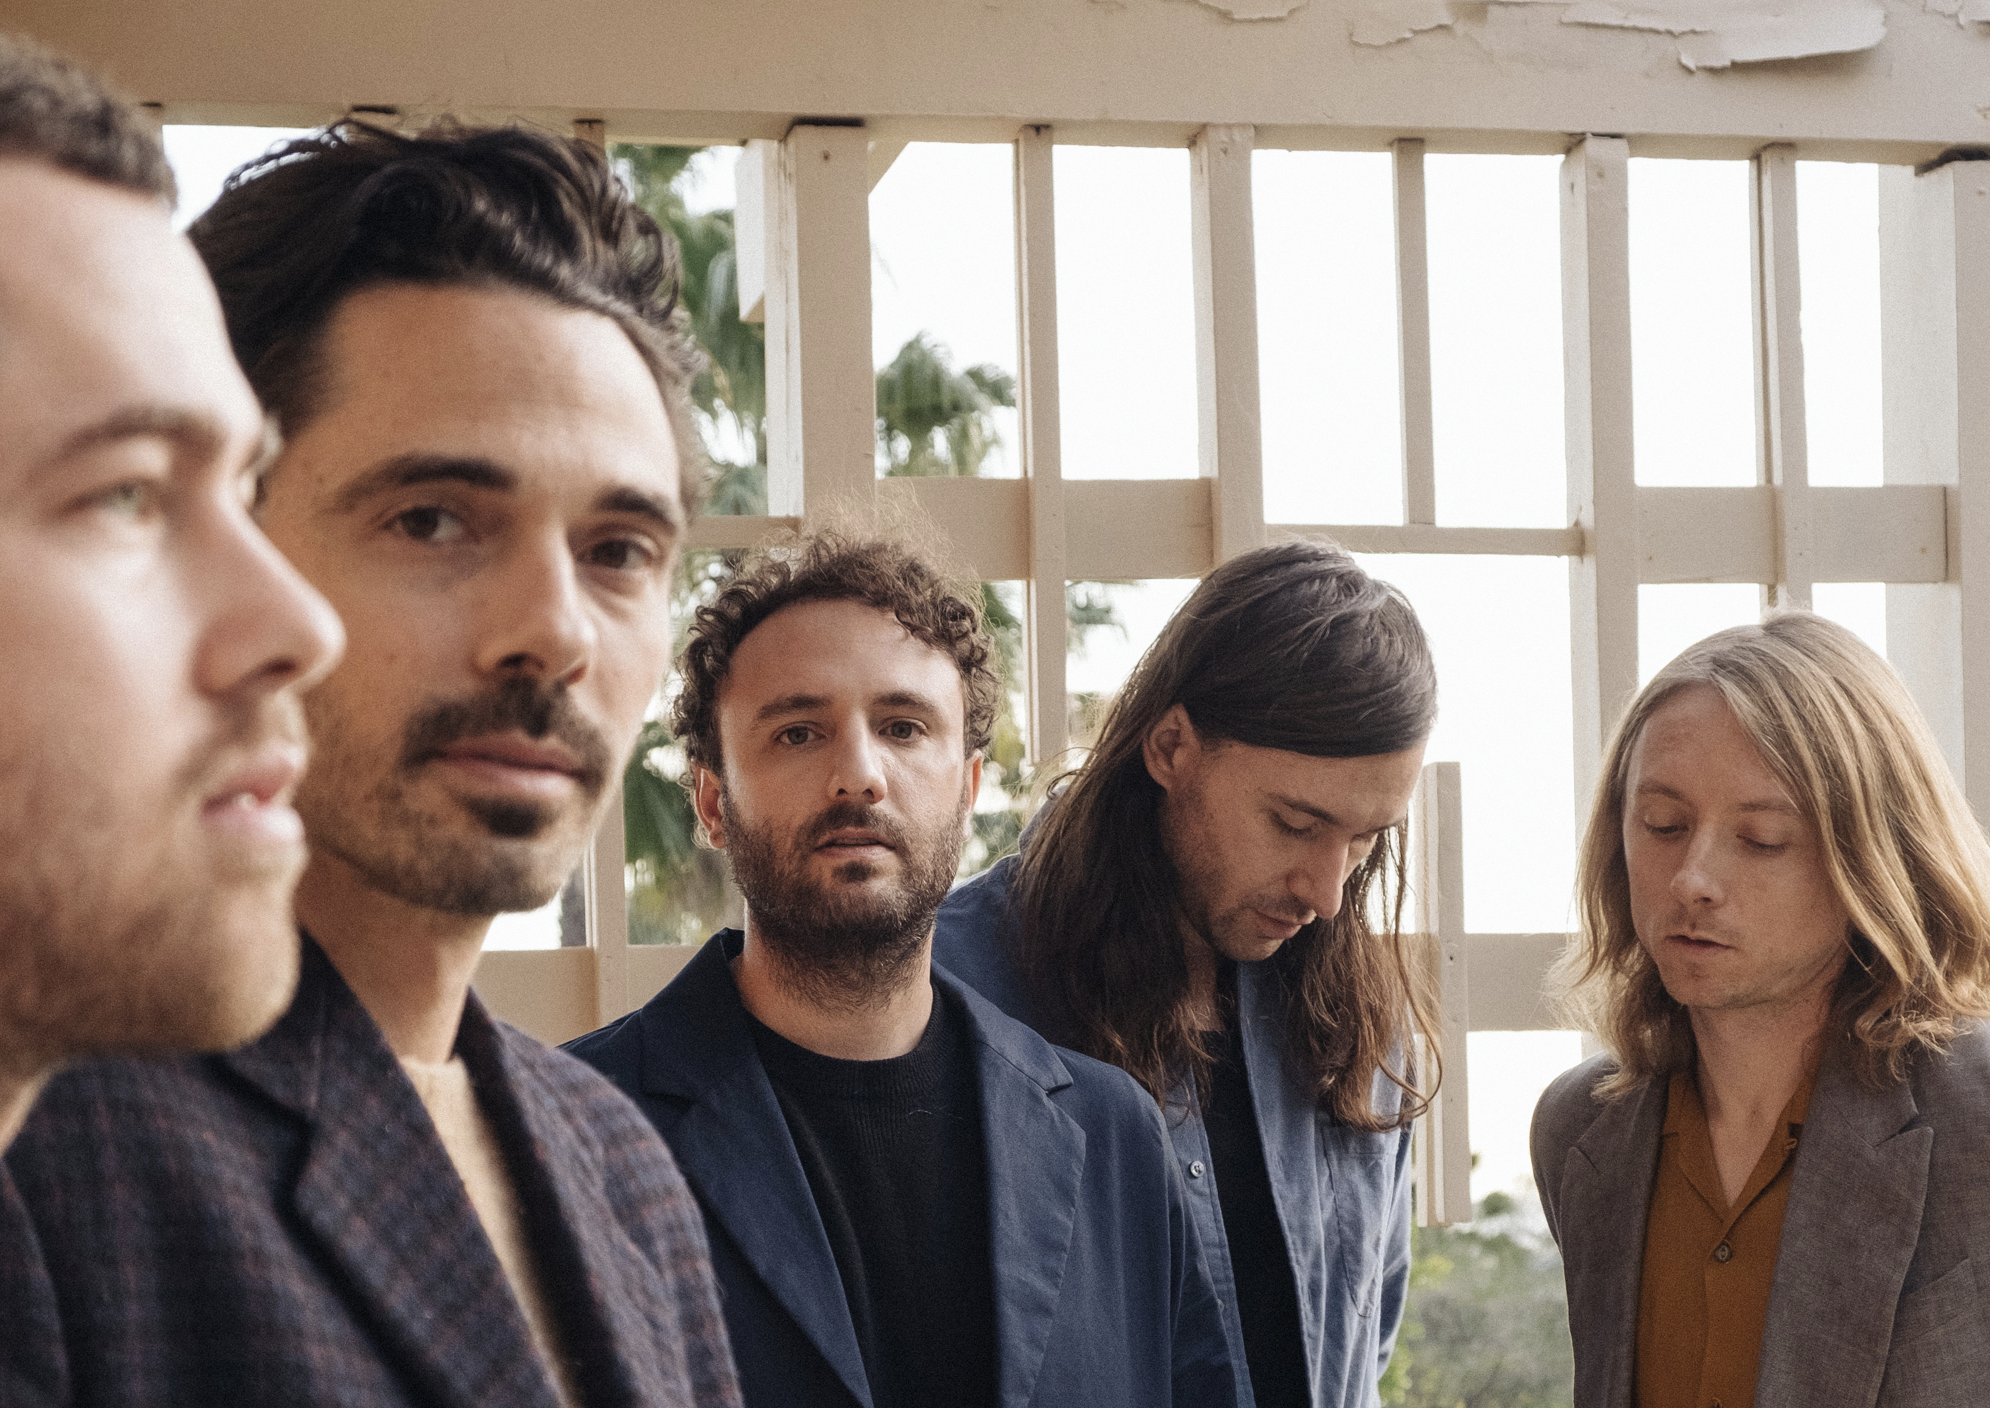 LOCAL NATIVES – back to the start